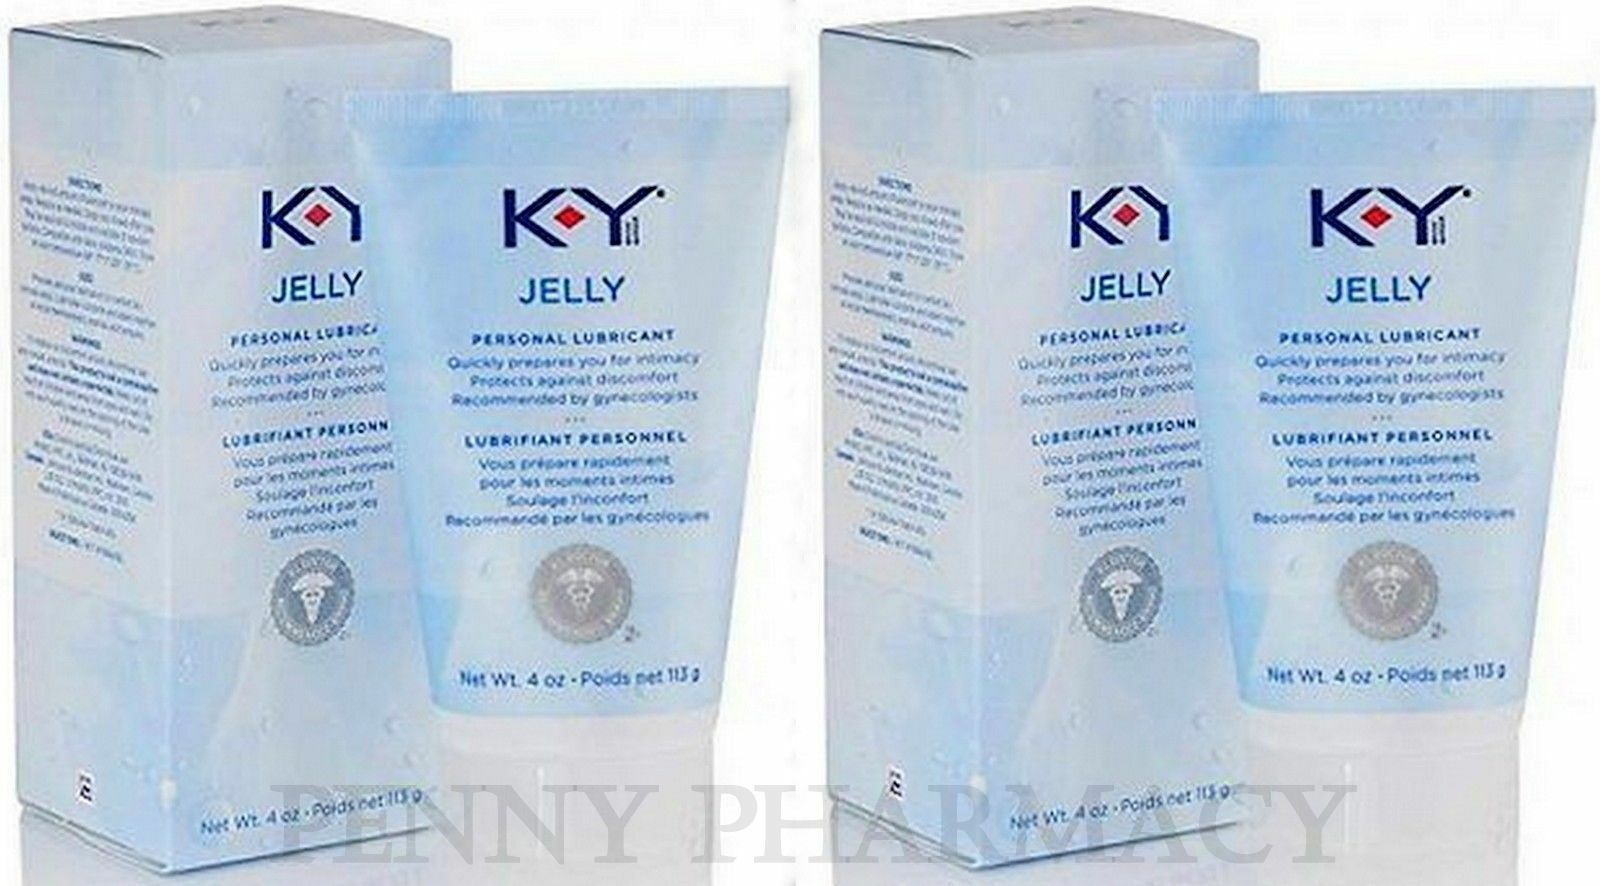 K-y Ky Jelly Personal Lubricant 4oz ( 2 Pack )  New Look!  Freshest Supply!!